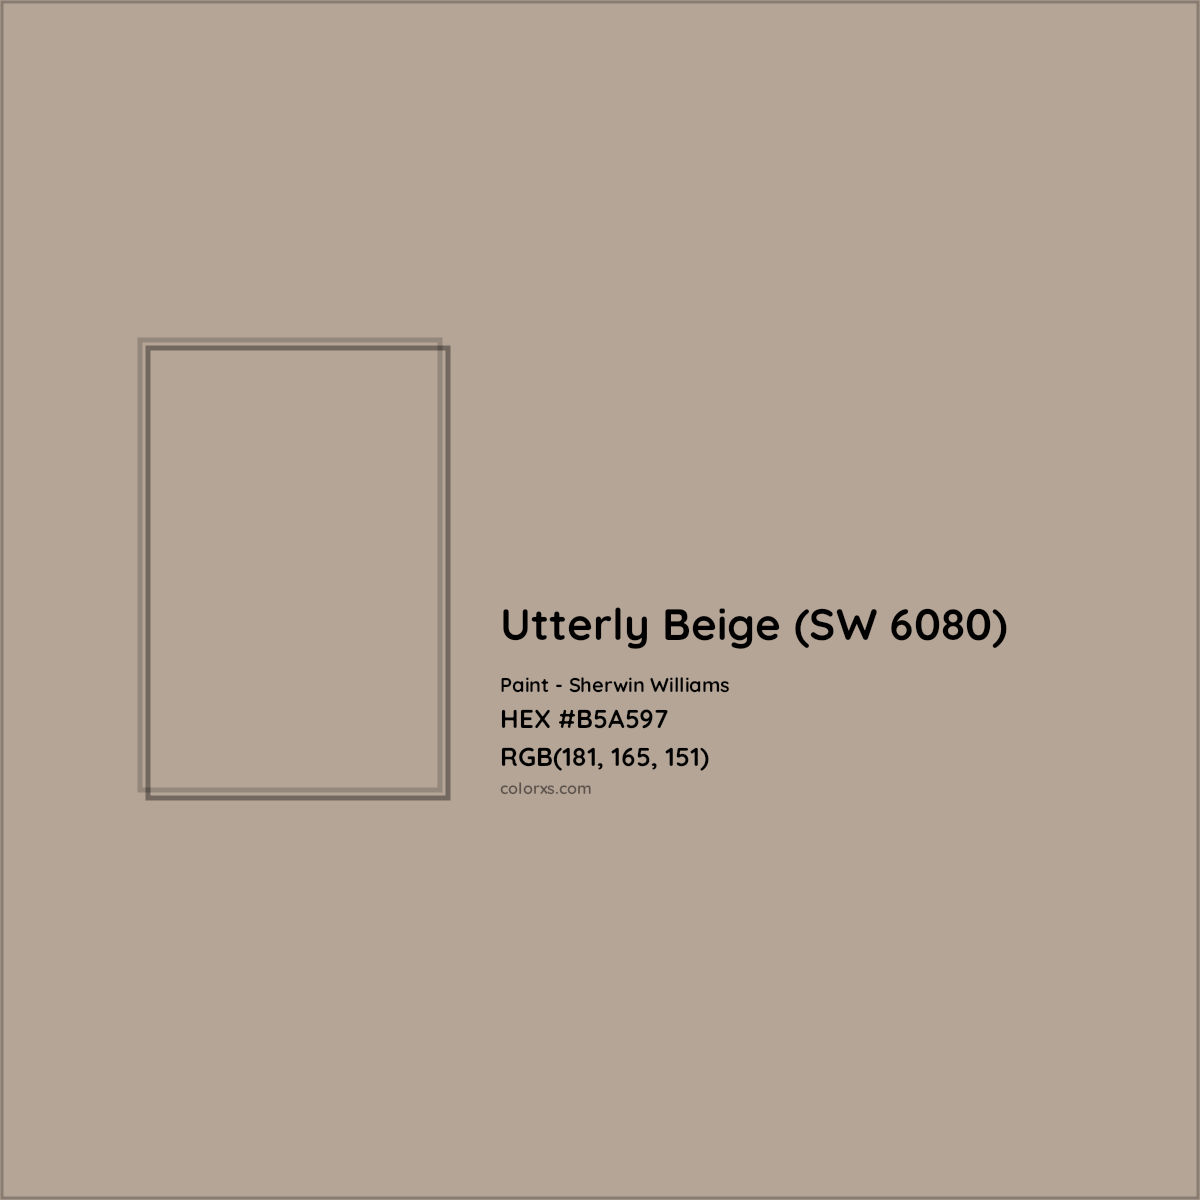 HEX #B5A597 Utterly Beige (SW 6080) Paint Sherwin Williams - Color Code